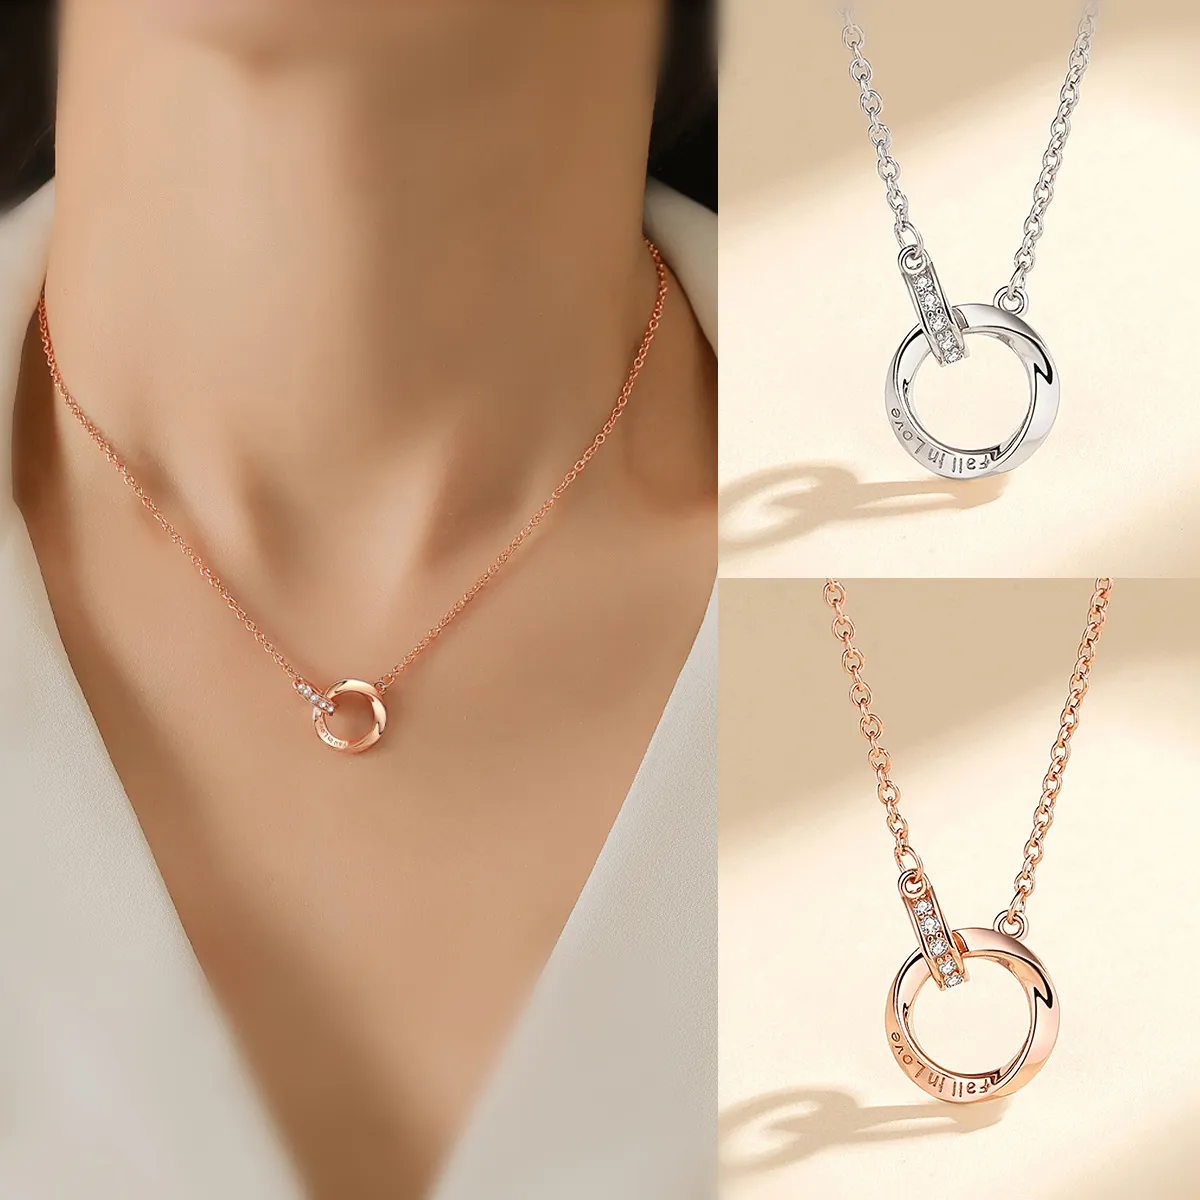 Mobius strip pendant necklace S925 sterling silver micro set zircon ring necklace Europe Women collar chain designer jewelry wedding party Valentine's Day gift SPC